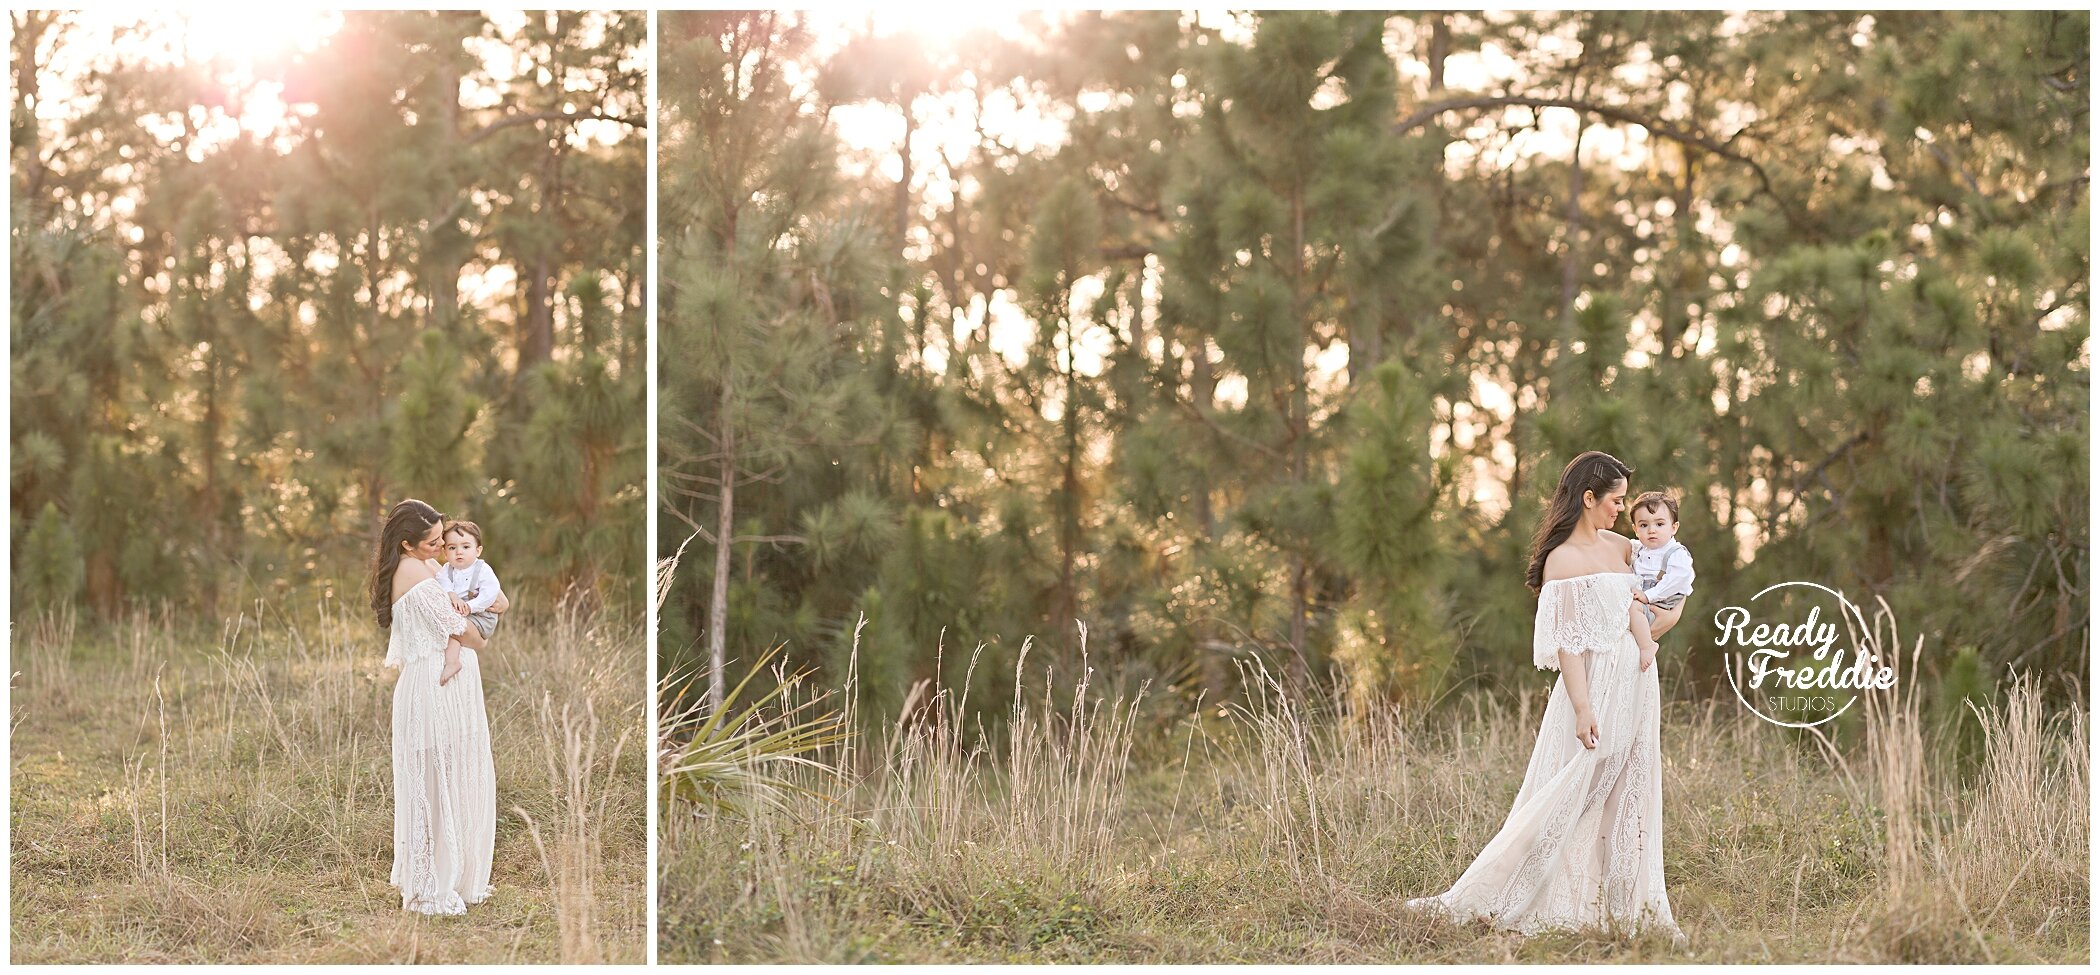 Motherhood Portrait in the Field during Sunset | Mommy and Me with Ivanna Vidal Photography